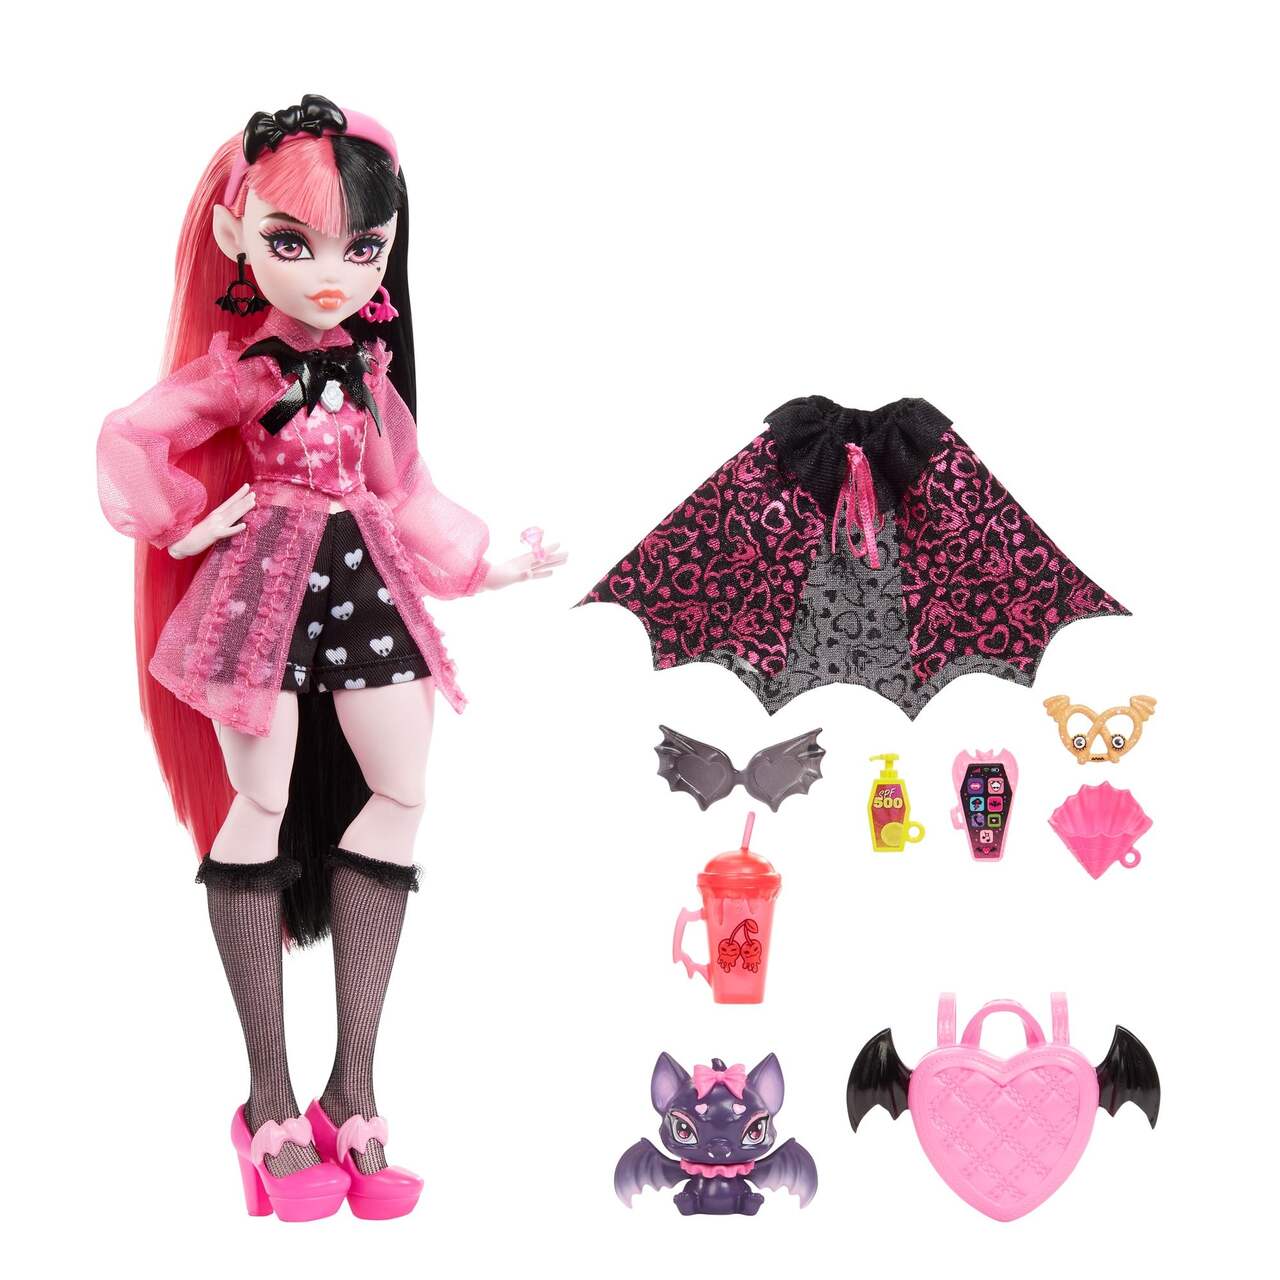 https://media-www.canadiantire.ca/product/seasonal-gardening/toys/toys-games/0509519/monster-high-dolls-draculara-0061279d-9d4f-430d-99d0-f60af9d5bc6d-jpgrendition.jpg?imdensity=1&imwidth=640&impolicy=mZoom